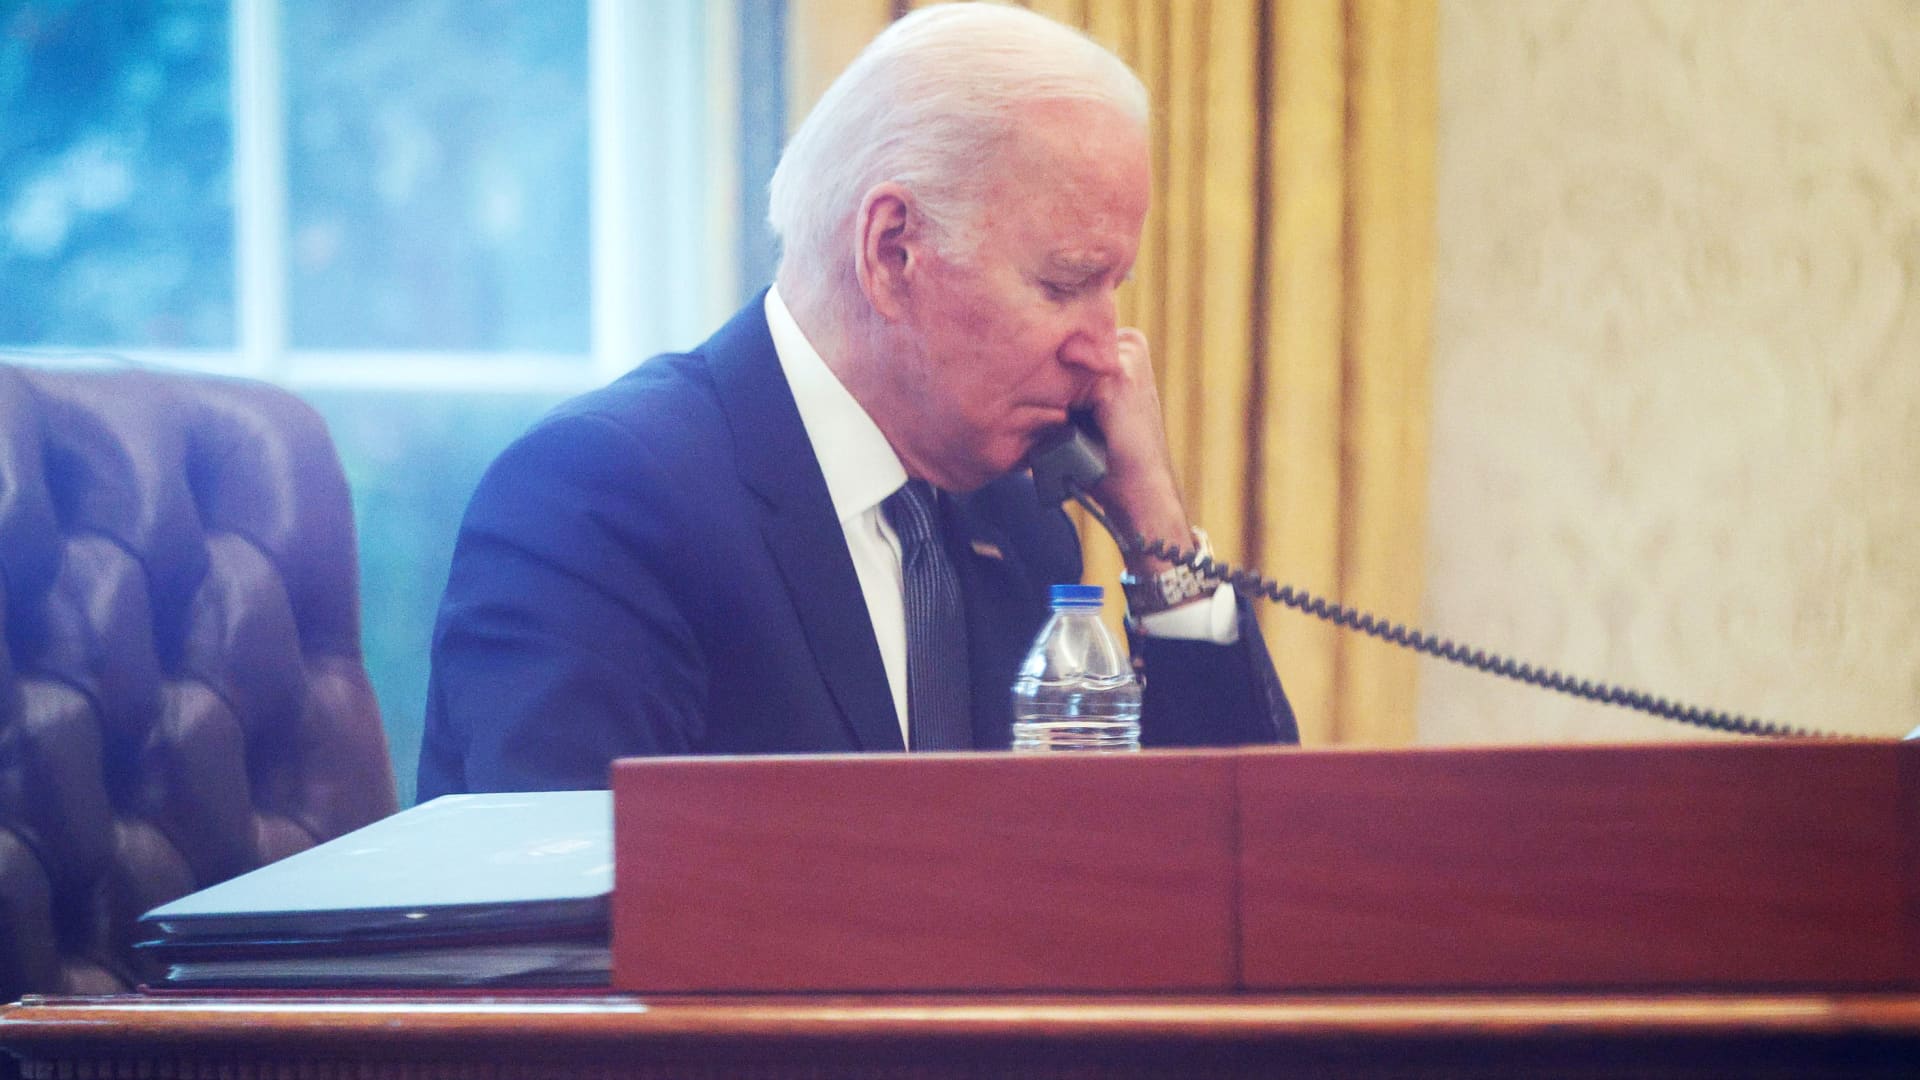 U.S. President Joe Biden is seen through a window in the Oval Office as he speaks by phone with Ukraine's President Volodymyr Zelensky at the White House in Washington, December 9, 2021.